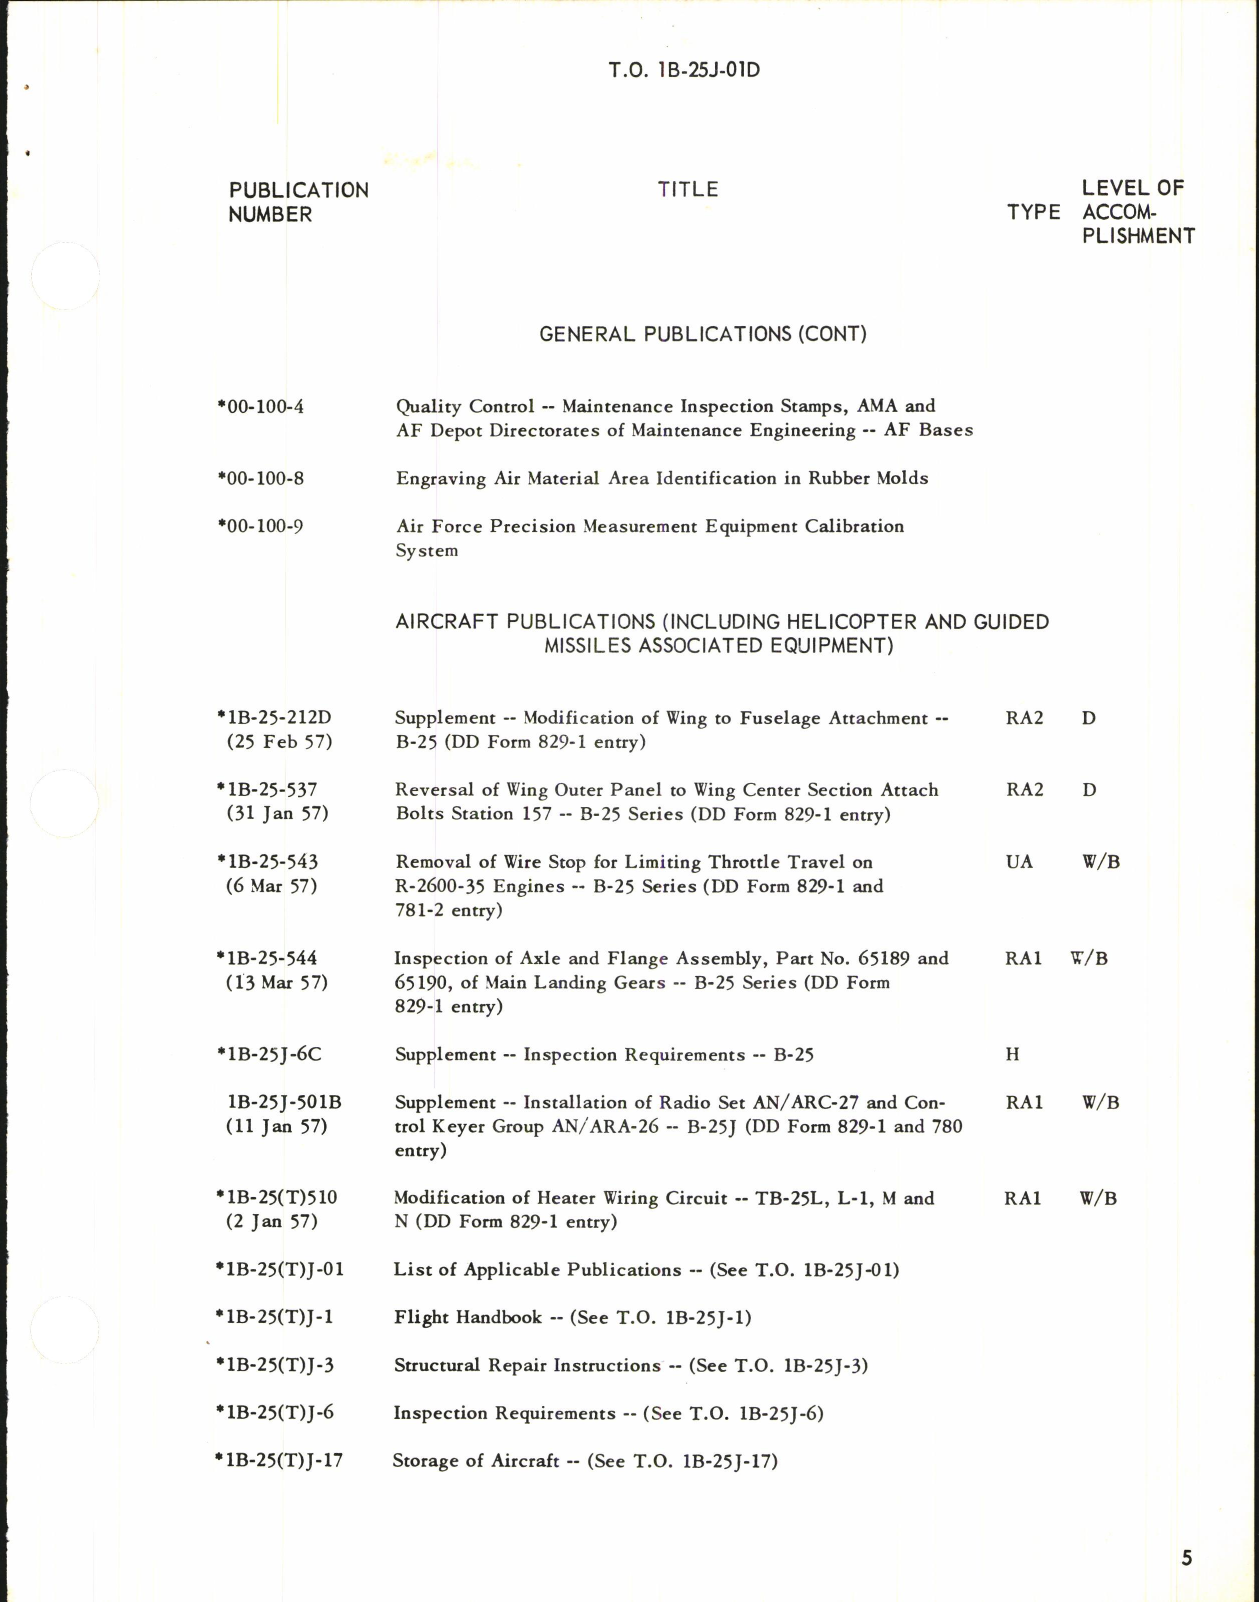 Sample page 5 from AirCorps Library document: Supplement List of Applicable Publications for B-25J, TB-25J, K, L, M, and N Aircraft & Equipment